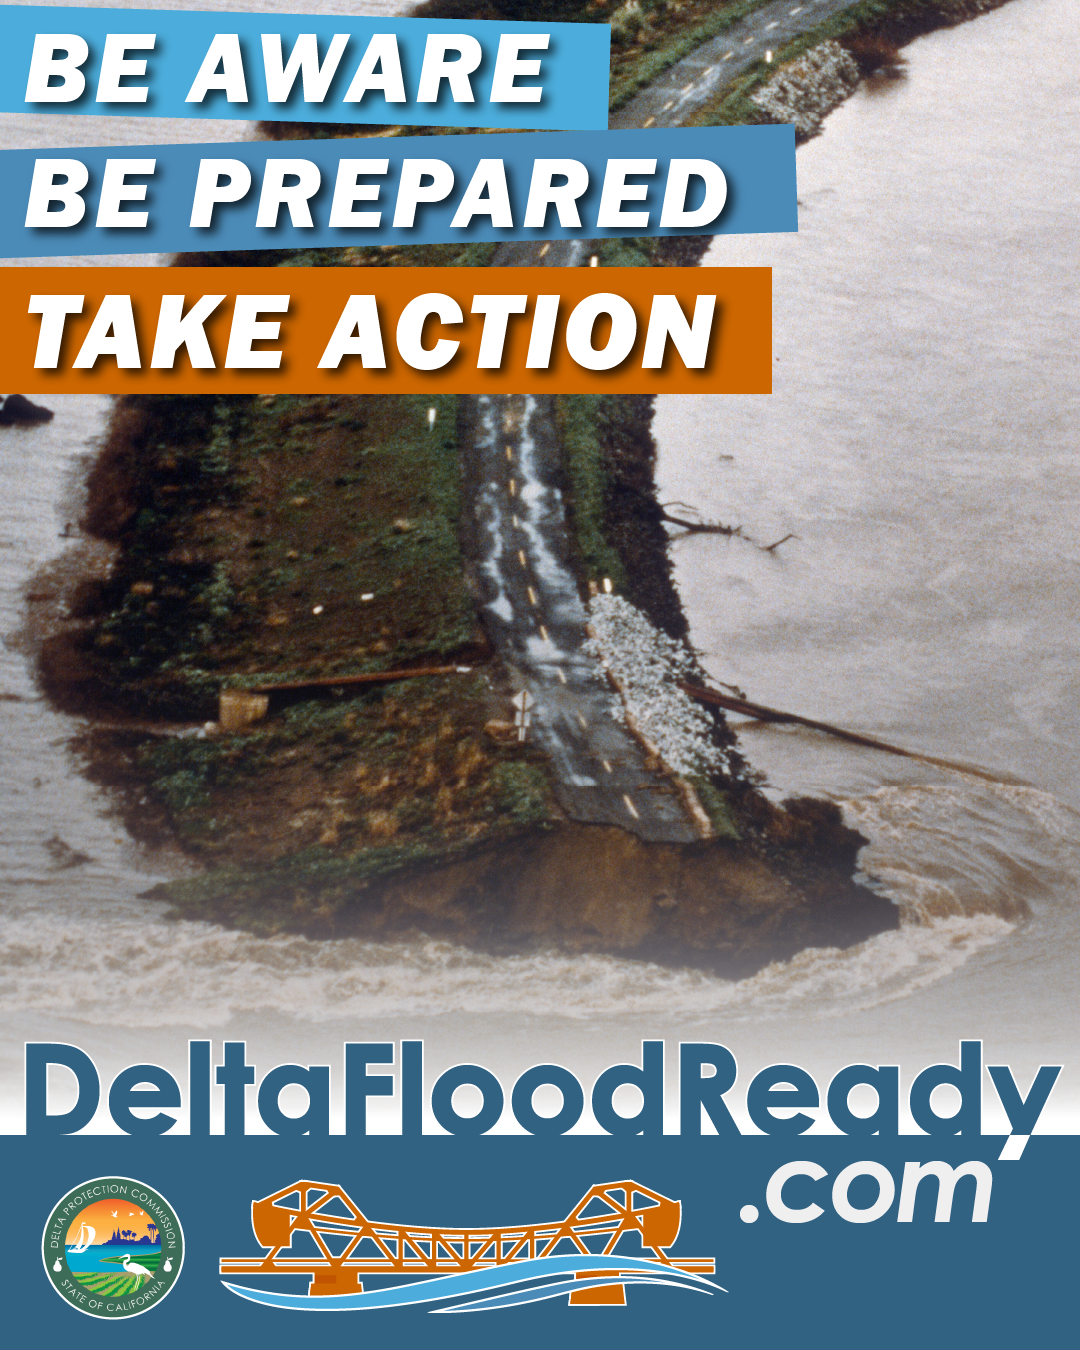 Flyer for DeltaFloodReady.com with tagline, "Be Aware. Be Prepared. Take Action."